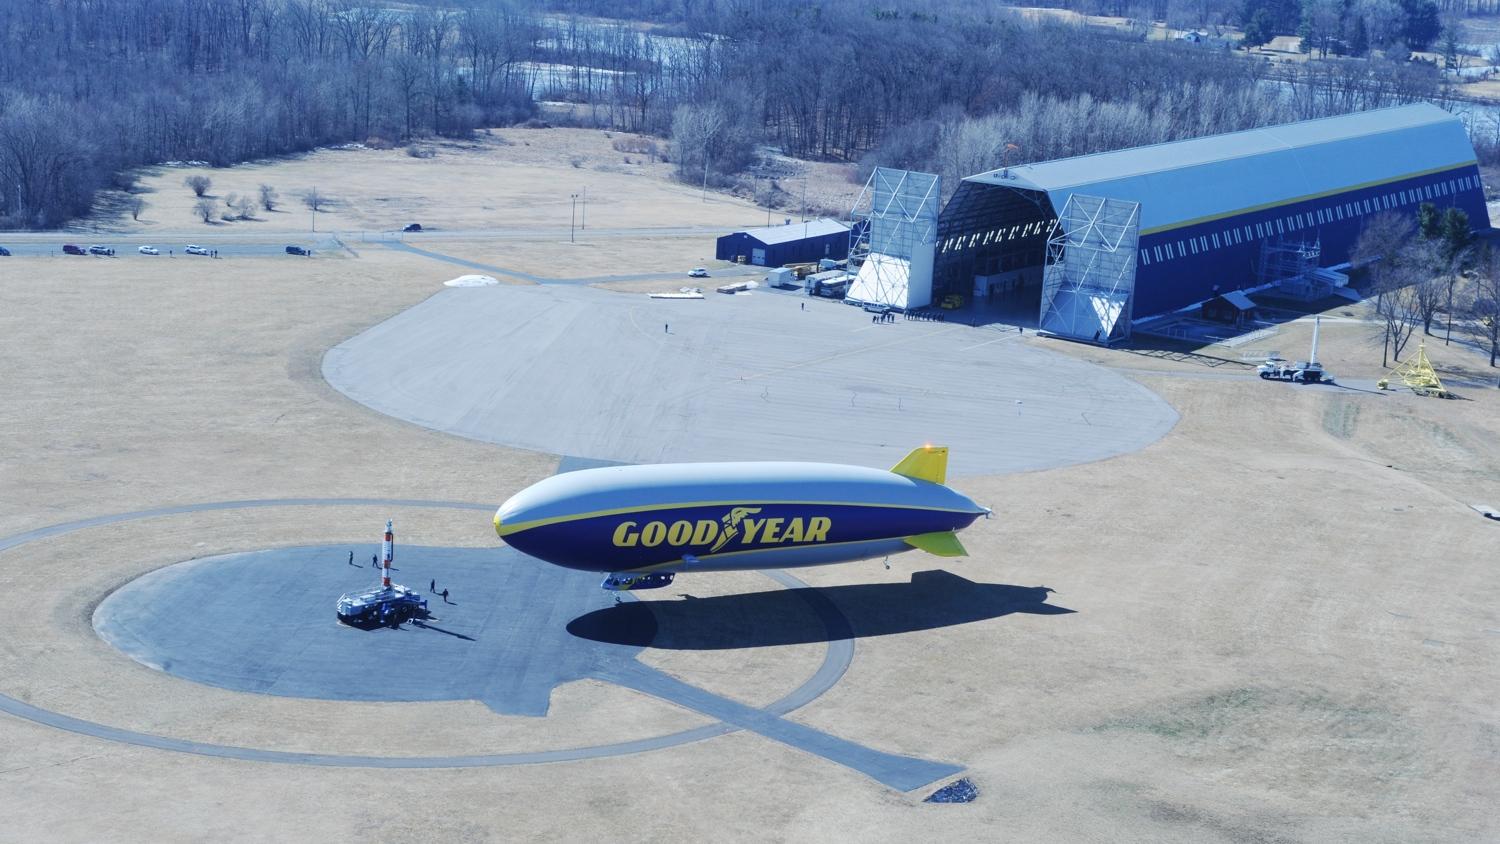 goodyear unveils new nt airship a13 1645